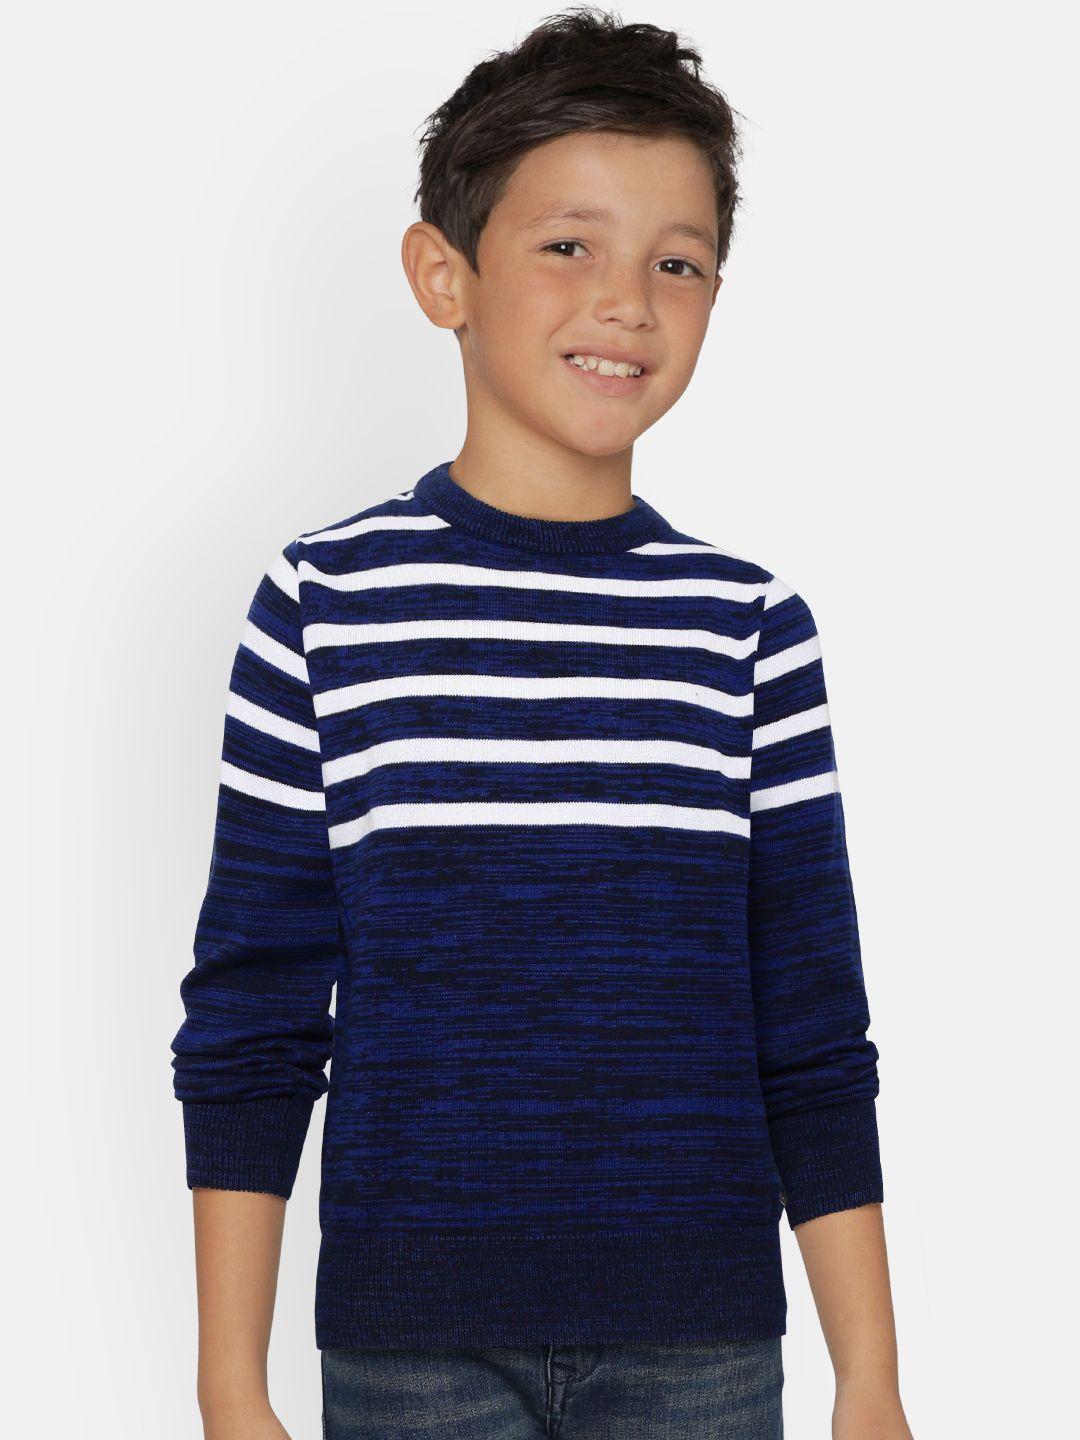 palm-tree-boys-navy-blue-&-white-striped-pullover-sweater